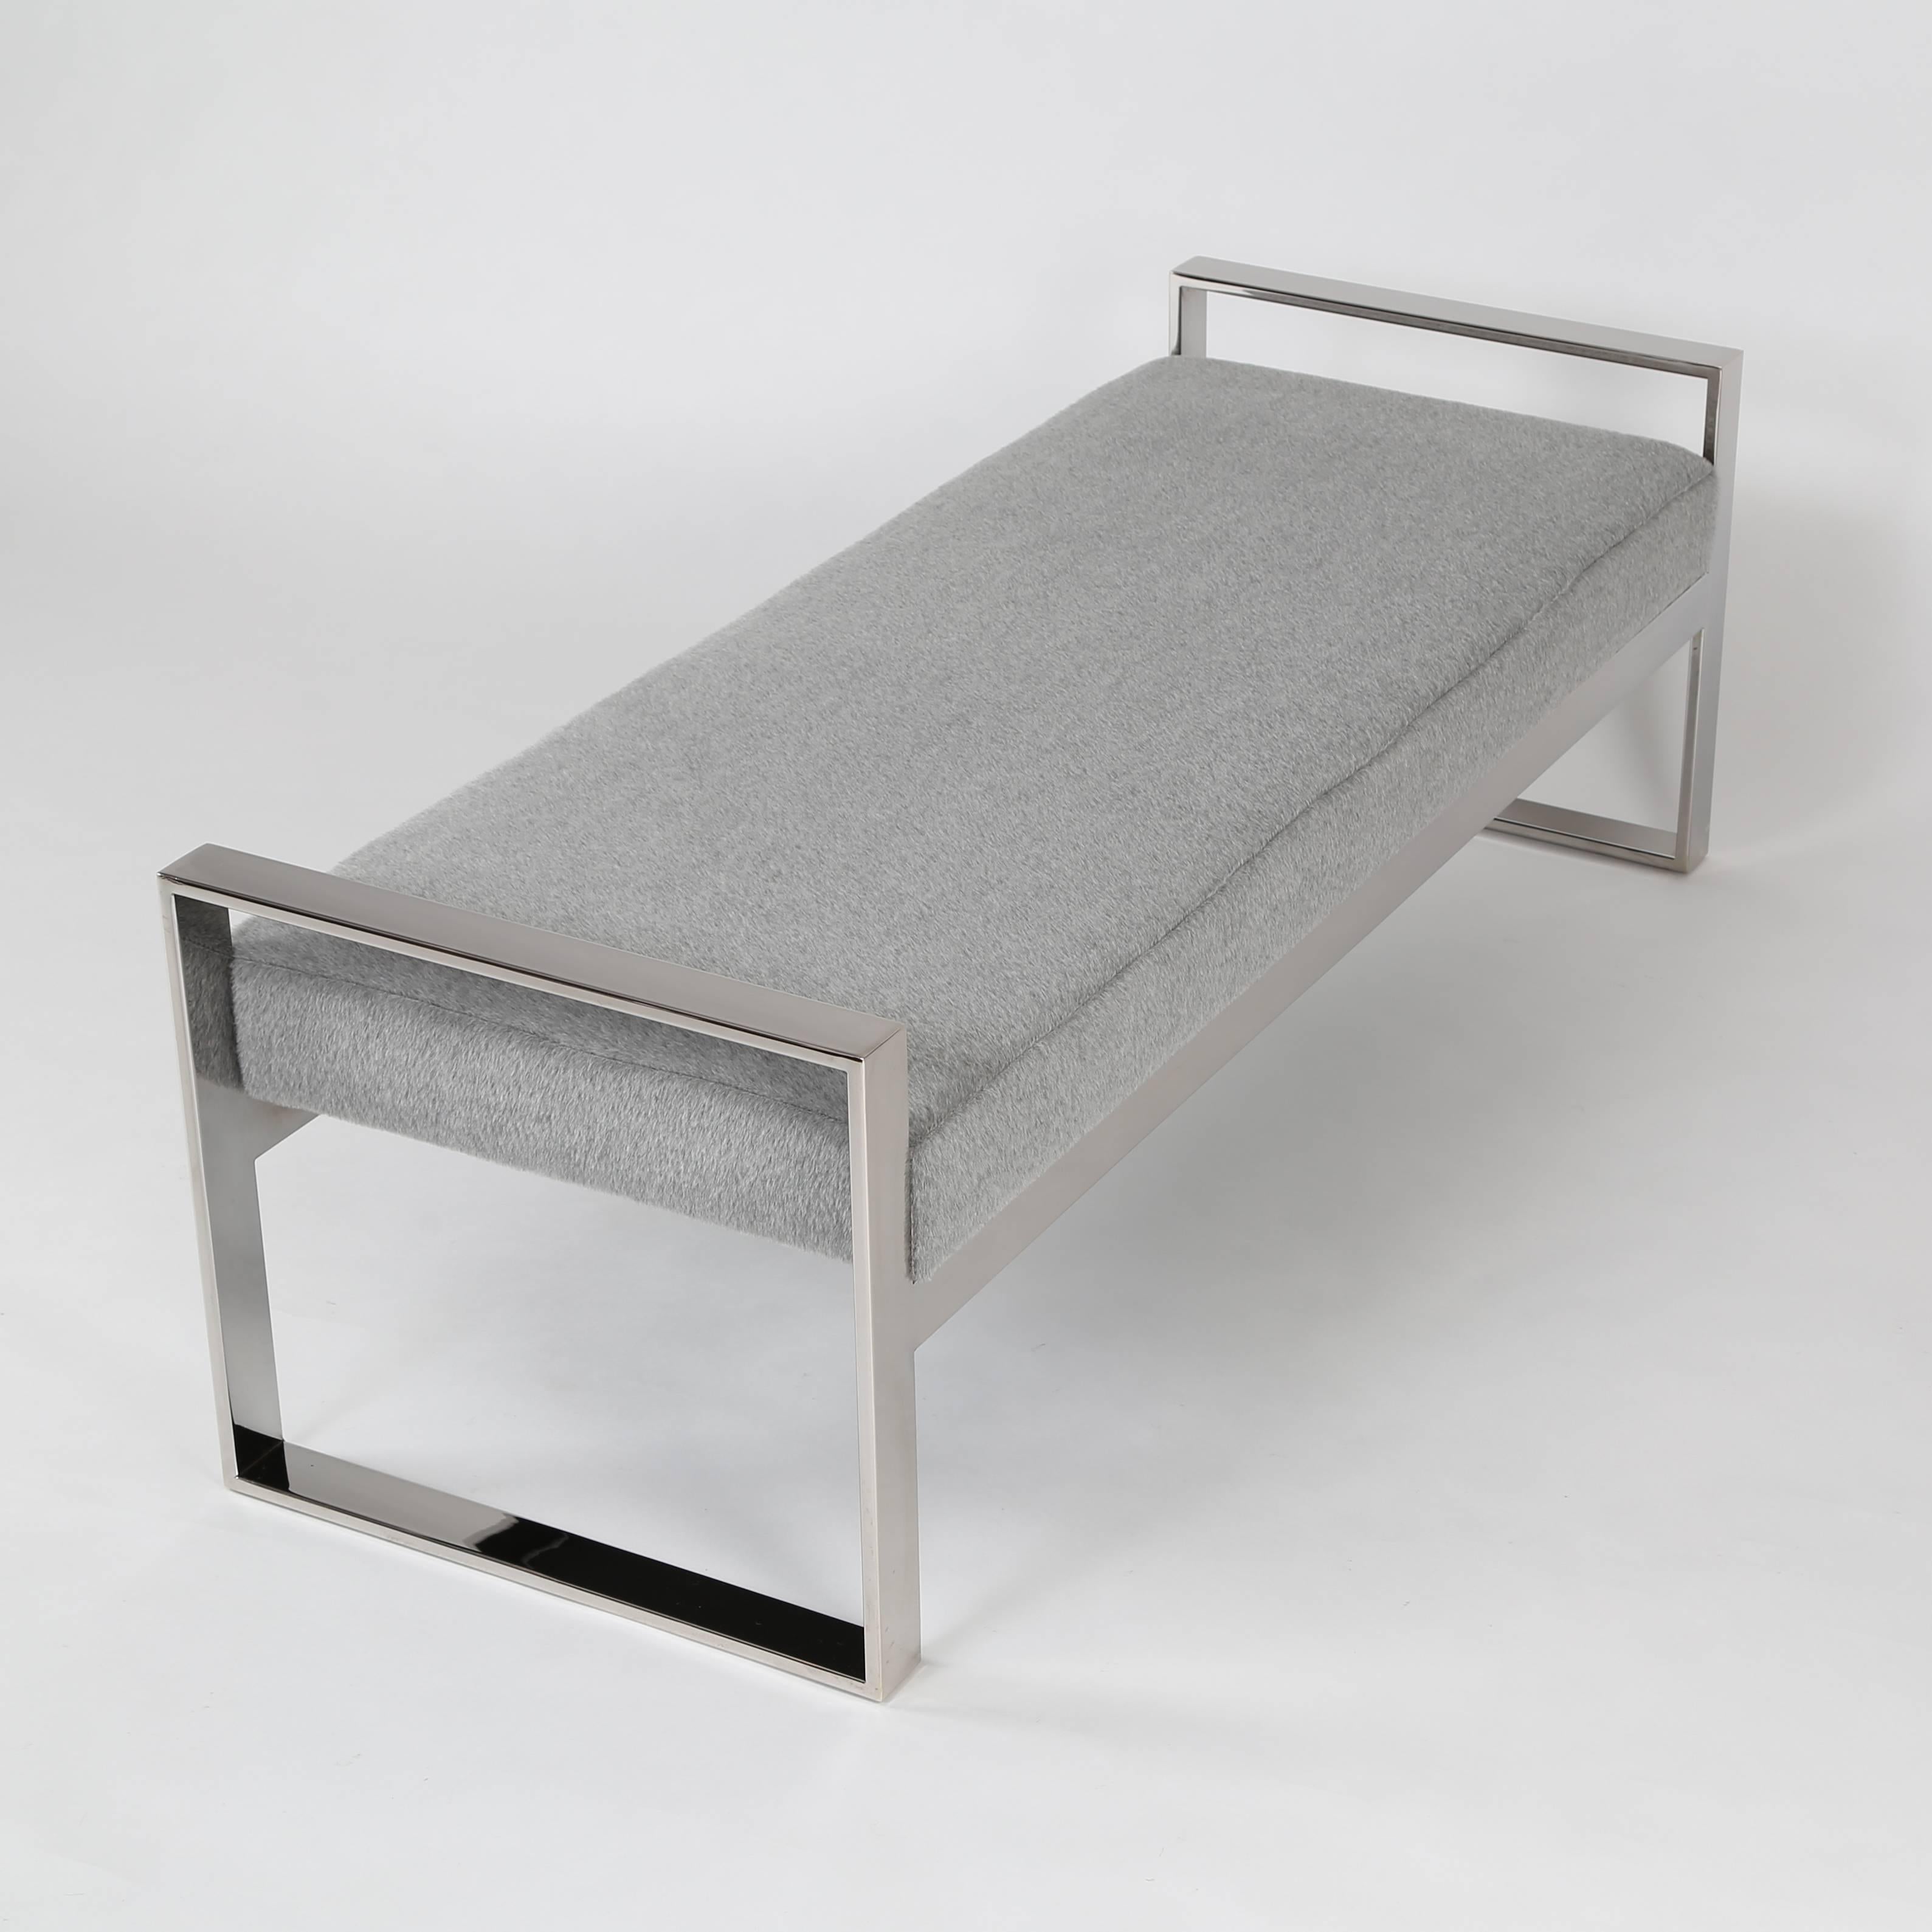 American Chrome-Frame Bench in the Style of Milo Baughman